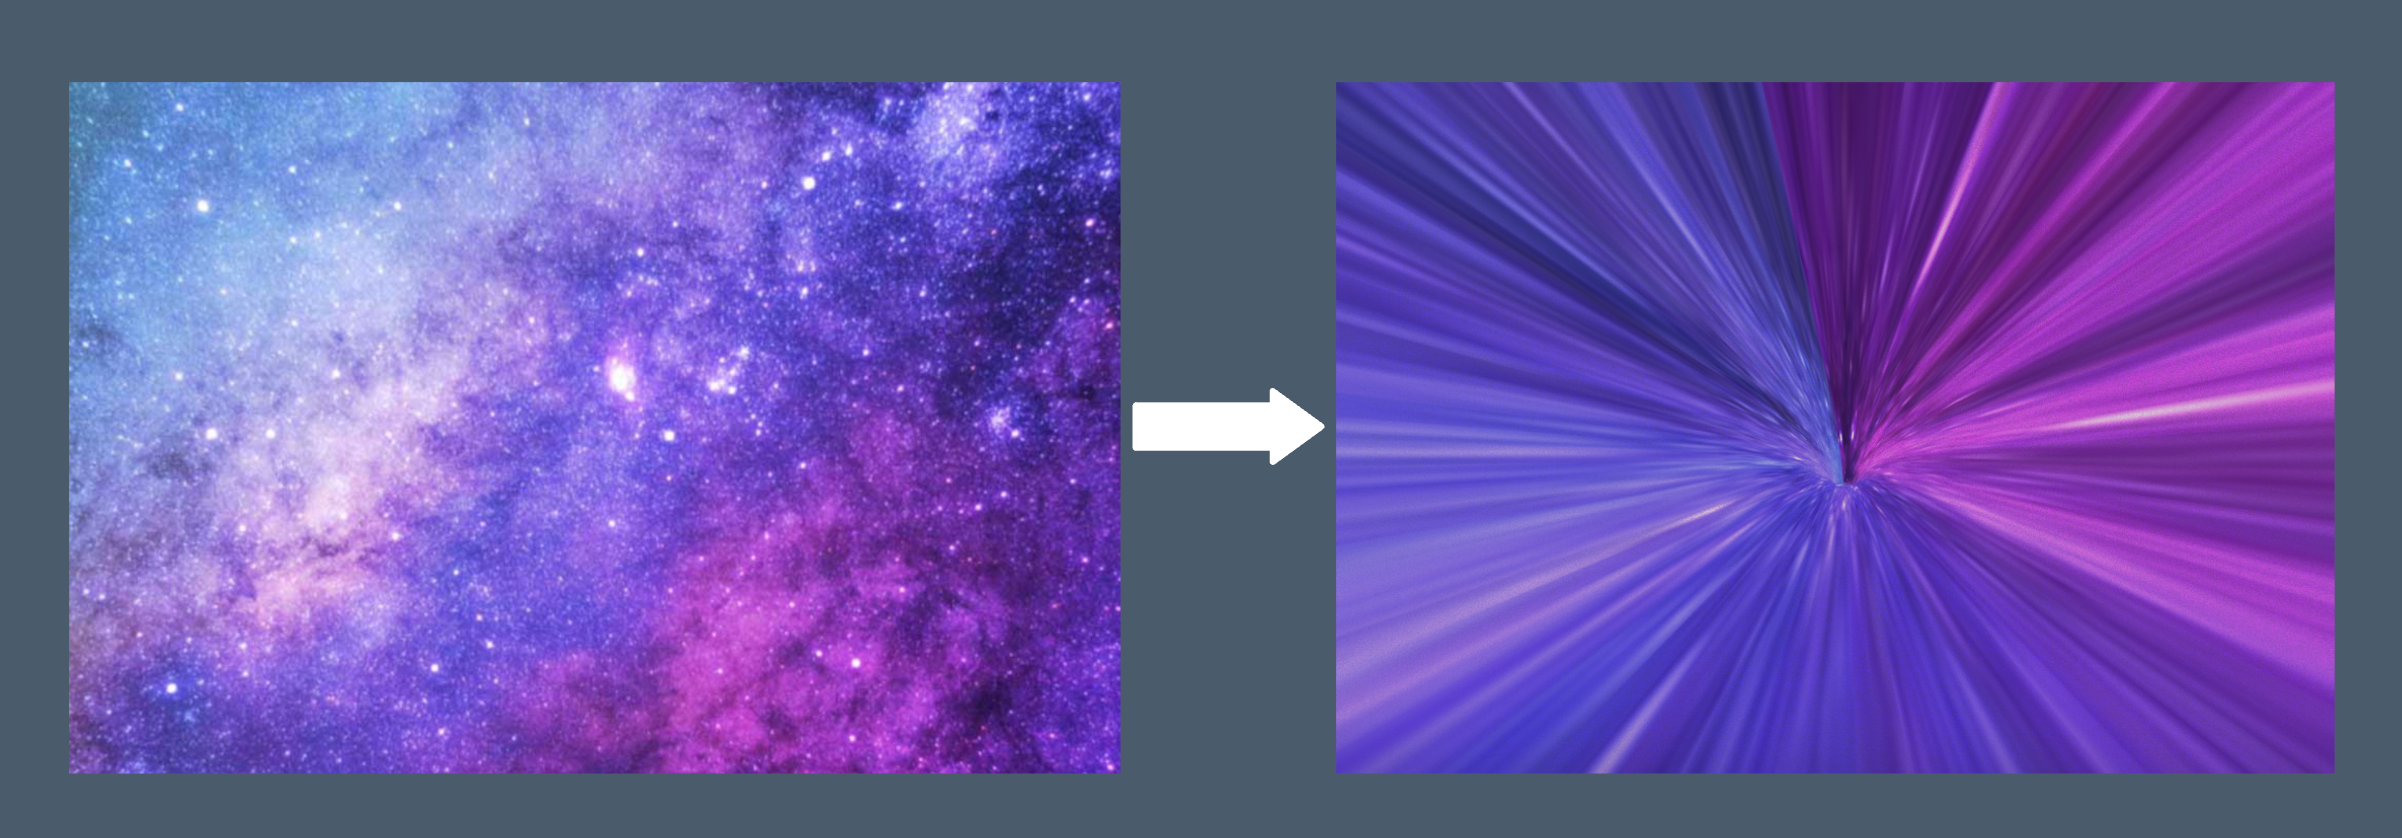 Flat purple nebula image with an arrow pointing to the version mapped to a 3D tunnel shape